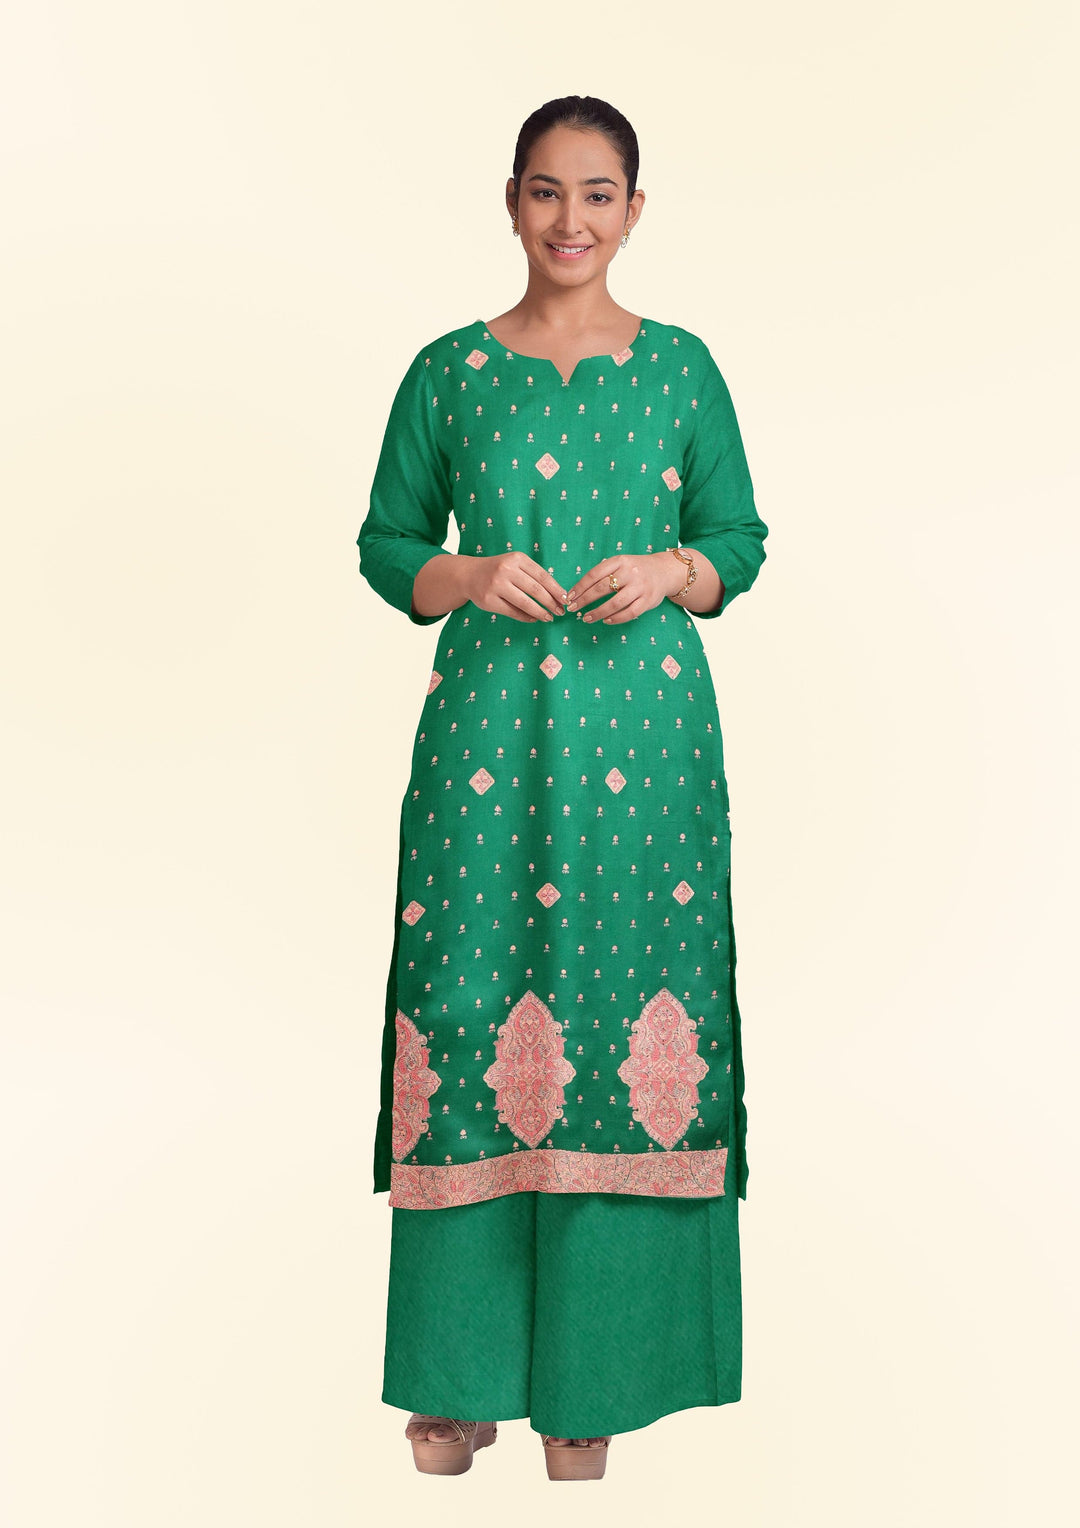 Pashtush India Apparel & Accessories Pashtush Unstitched Kashmiri Embroidery 2-Piece Suit, Fine Wool, Soft and Warm, Green